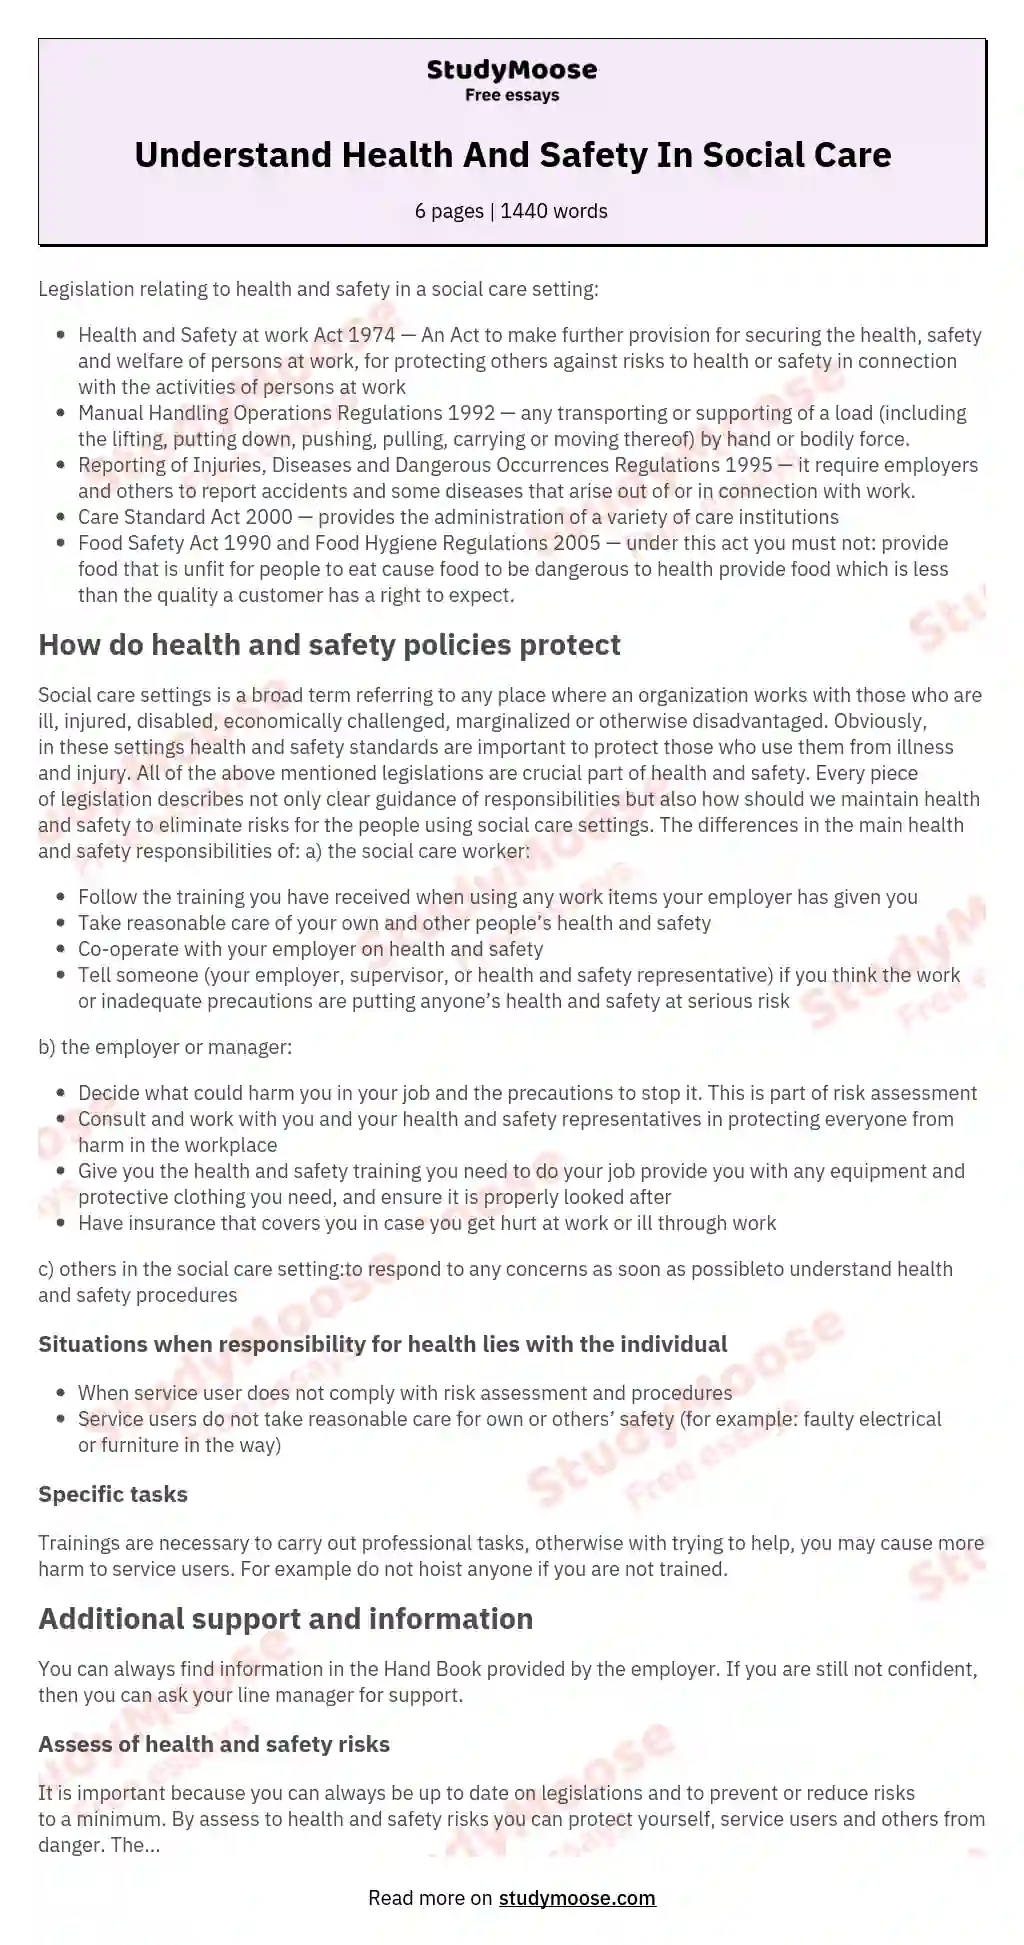 Understand Health And Safety In Social Care essay